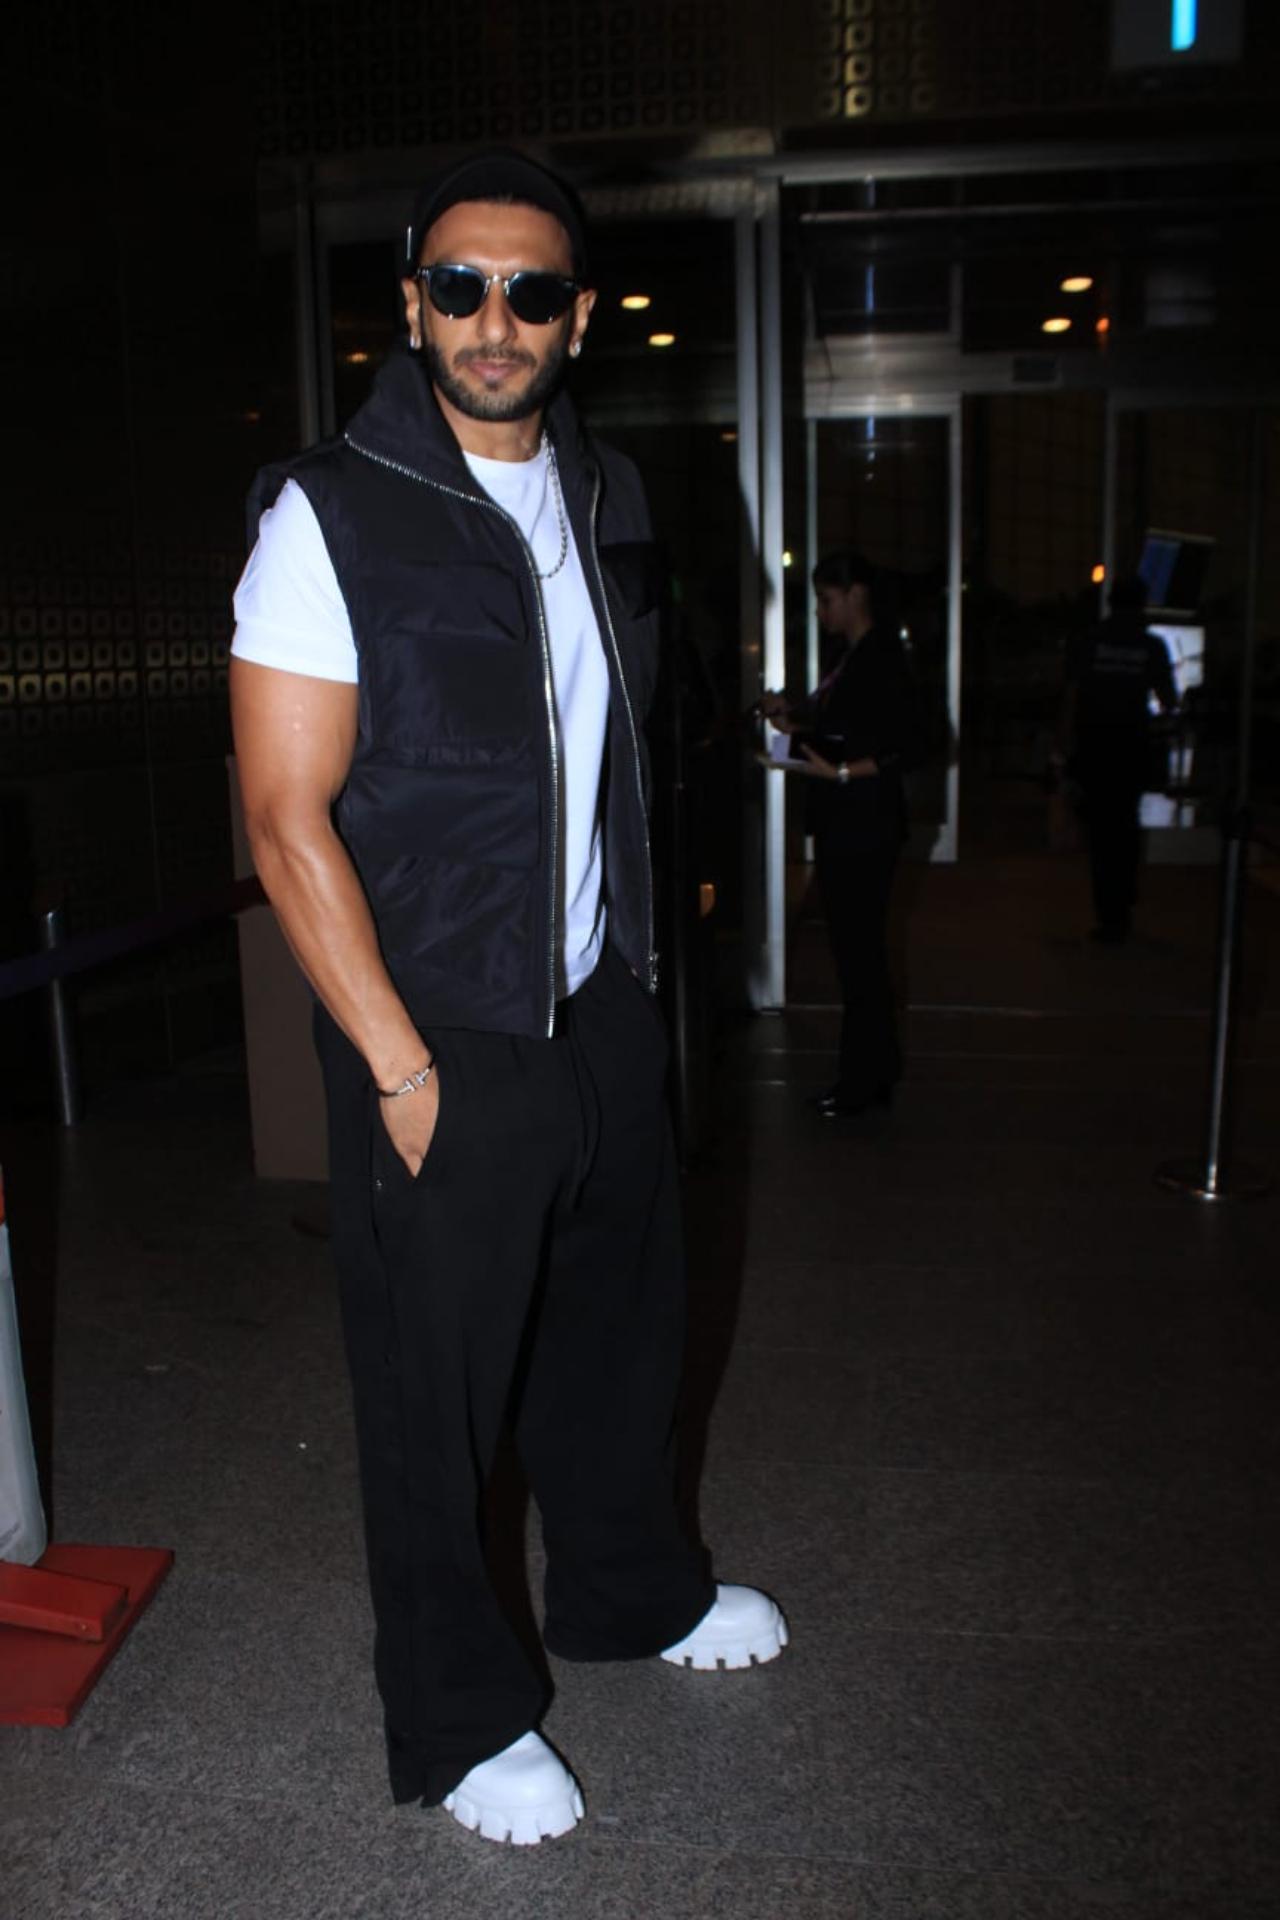 Ranveer Singh was snapped at the airport as he left for Baroda to kick start the promotions of 'Rocky Aur Rani Kii Prem Kahaani'